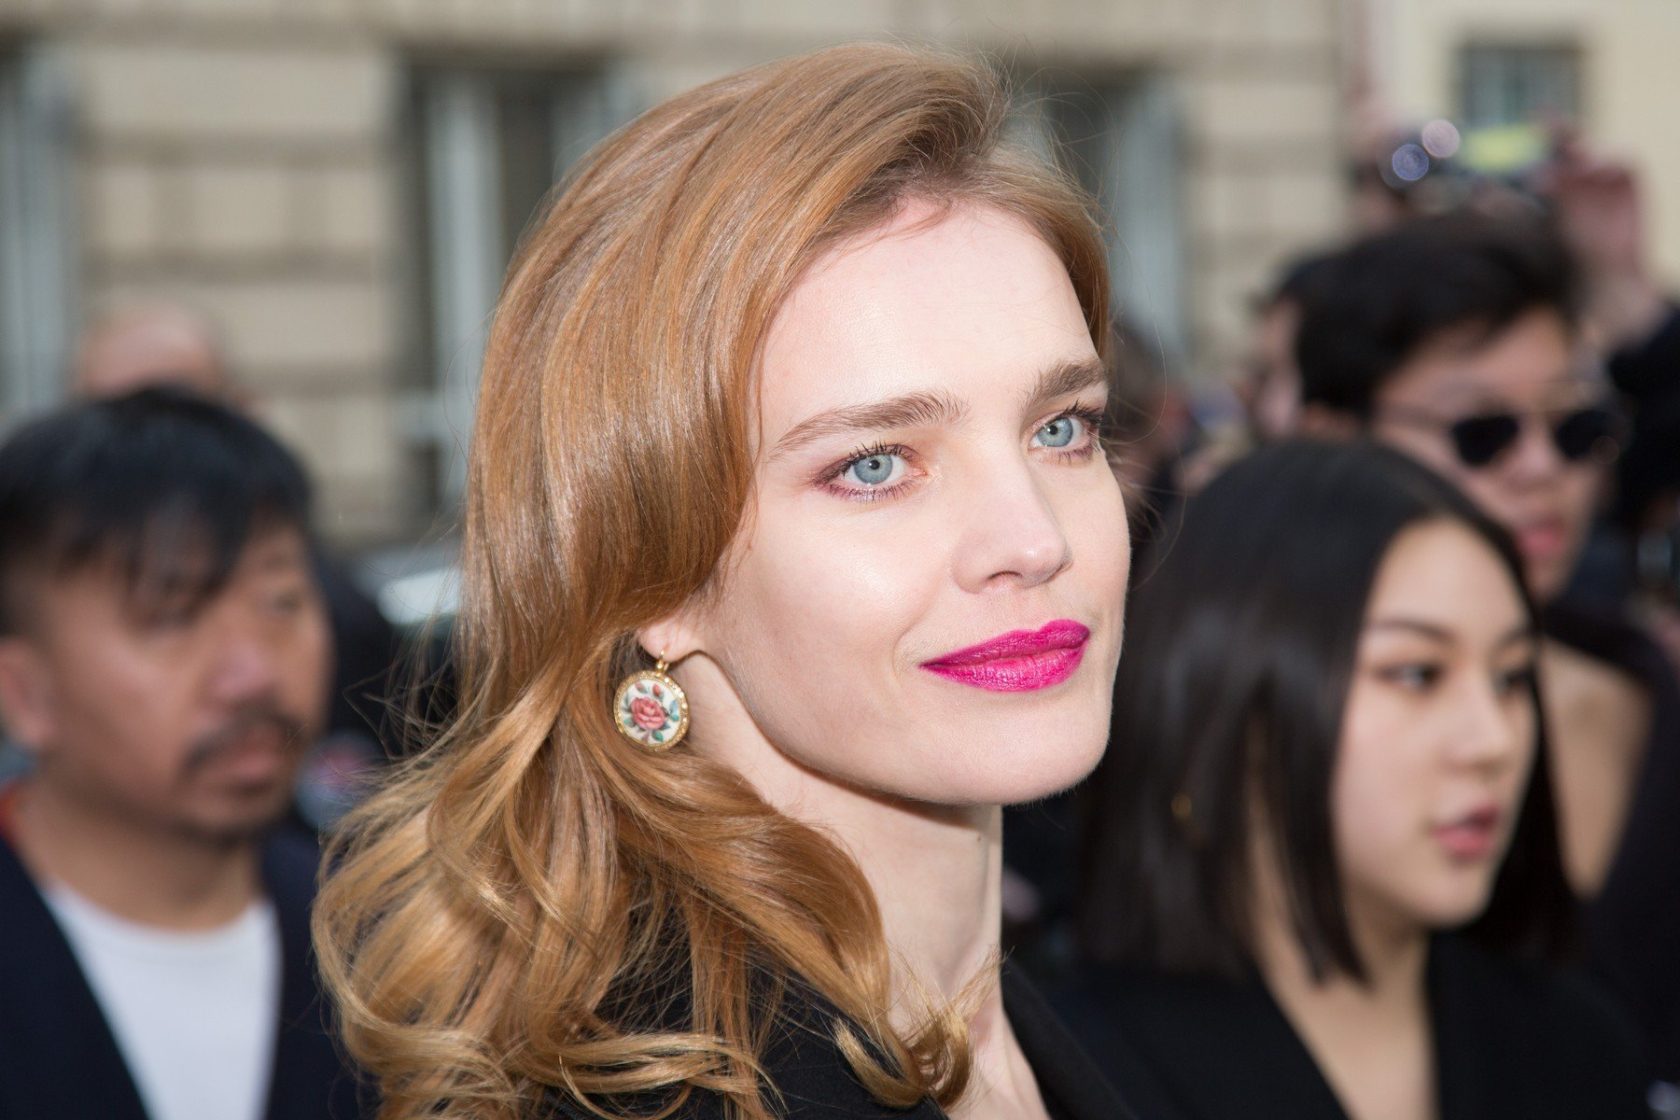 Natalia Vodianova arriving to the Christian Dior Haute Couture Spring Summer 2018 show as part of Paris Fashion Week on January 22, 2018 in Paris, France., Image: 361045178, License: Rights-managed, Restrictions: , Model Release: no, Credit line: Profimedia, KCS Presse